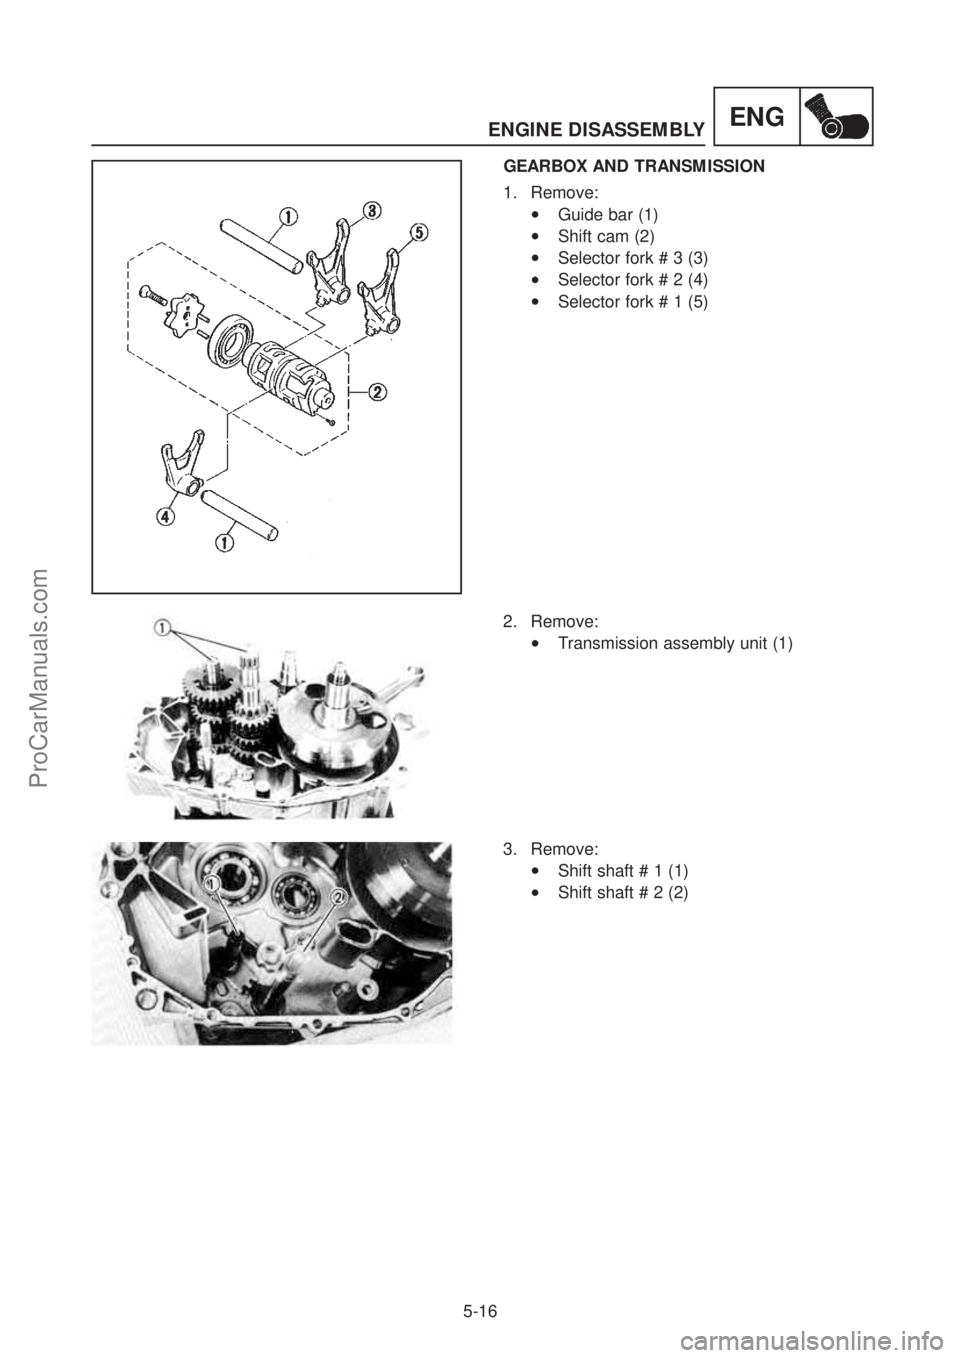 YAMAHA TT600RE 2004  Service Manual ENGINE DISASSEMBLY
5-16
ENG
GEARBOX AND TRANSMISSION  
1. Remove: 
•Guide bar (1) 
•Shift cam (2) 
•Selector fork # 3 (3) 
•Selector fork # 2 (4) 
•Selector fork # 1 (5)  
2. Remove: 
•Tra